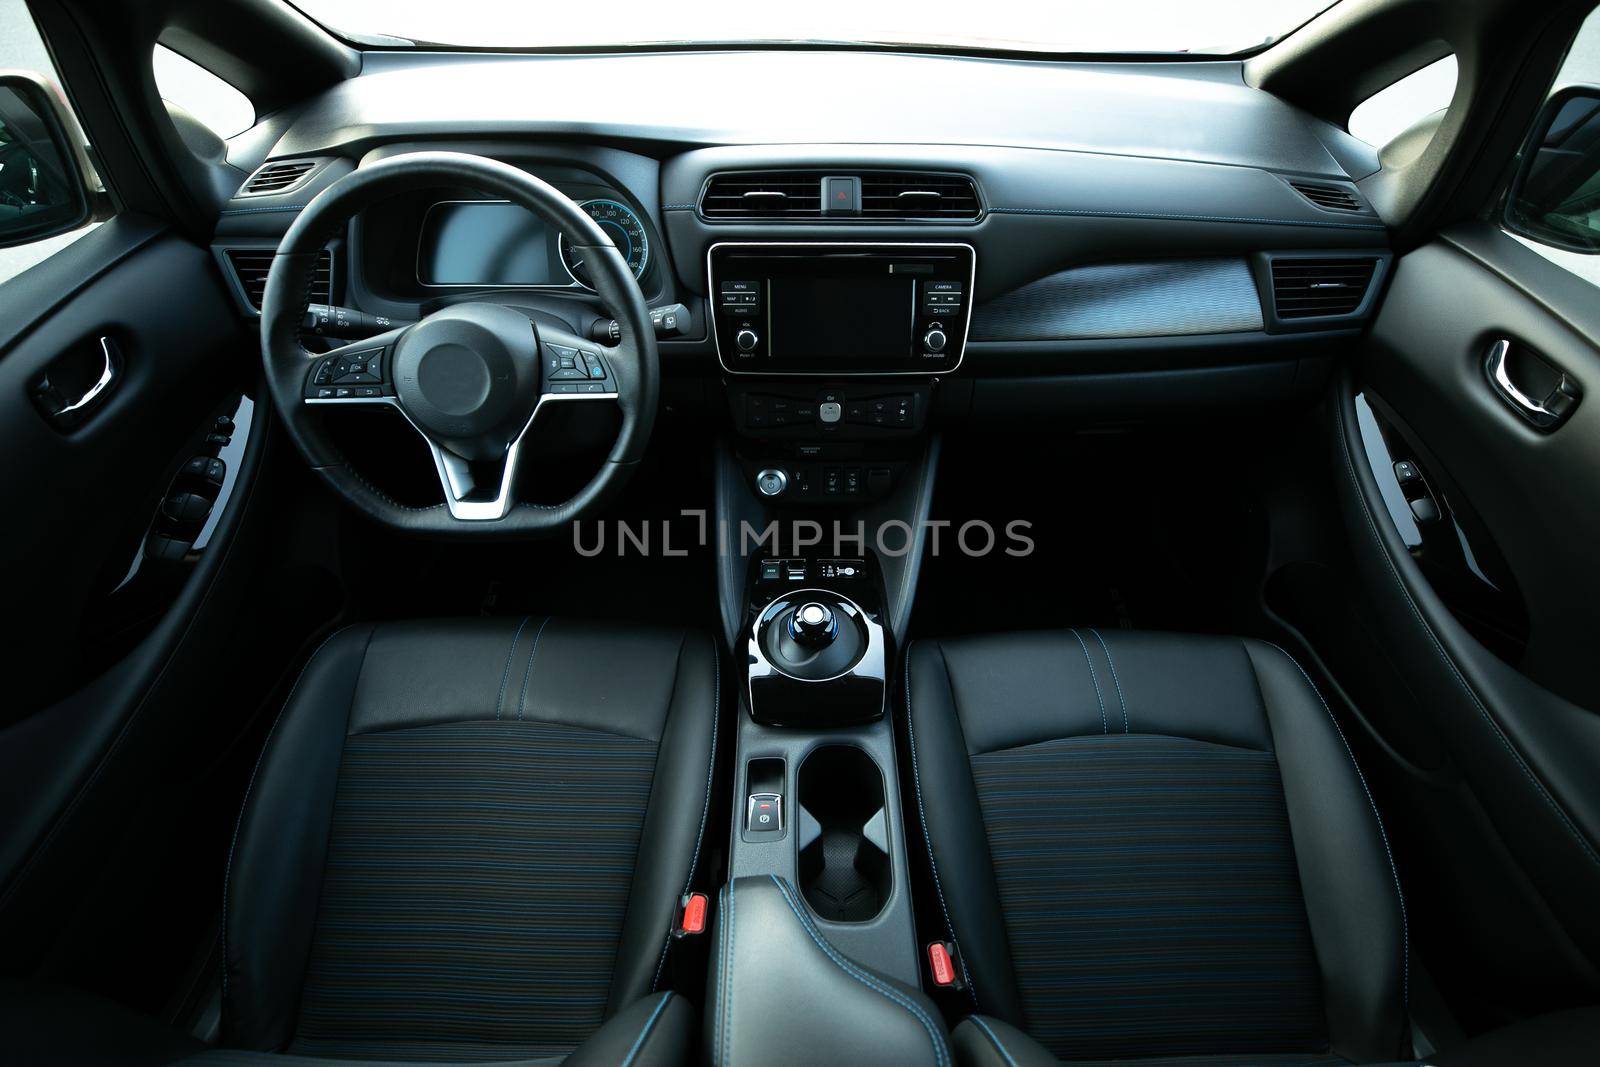 Electric car interior details of door handle with windows controls and adjustments. Inside car interior with front seats, driver and passenger, textile, windows, door panels, console by uflypro